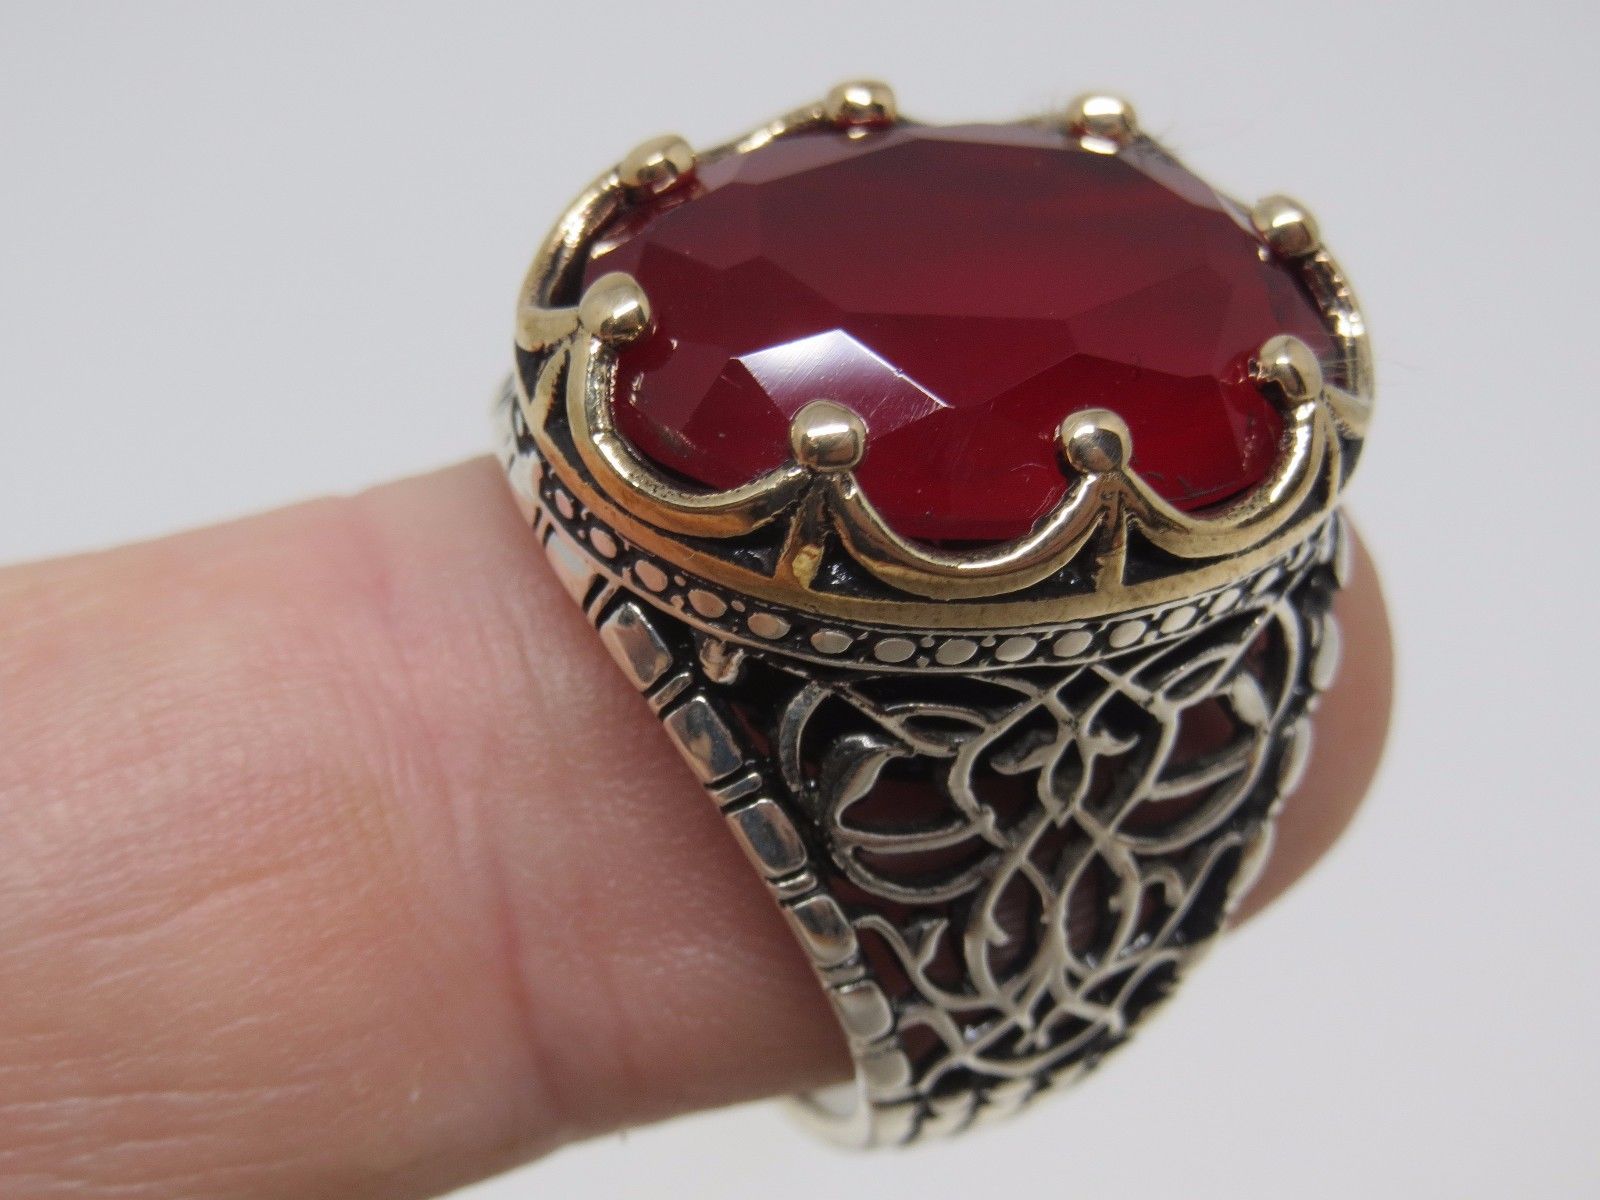 IMPORTANT GUIDELINES TO TAKE CARE WHEN BUYING RUBY RINGS FOR MEN